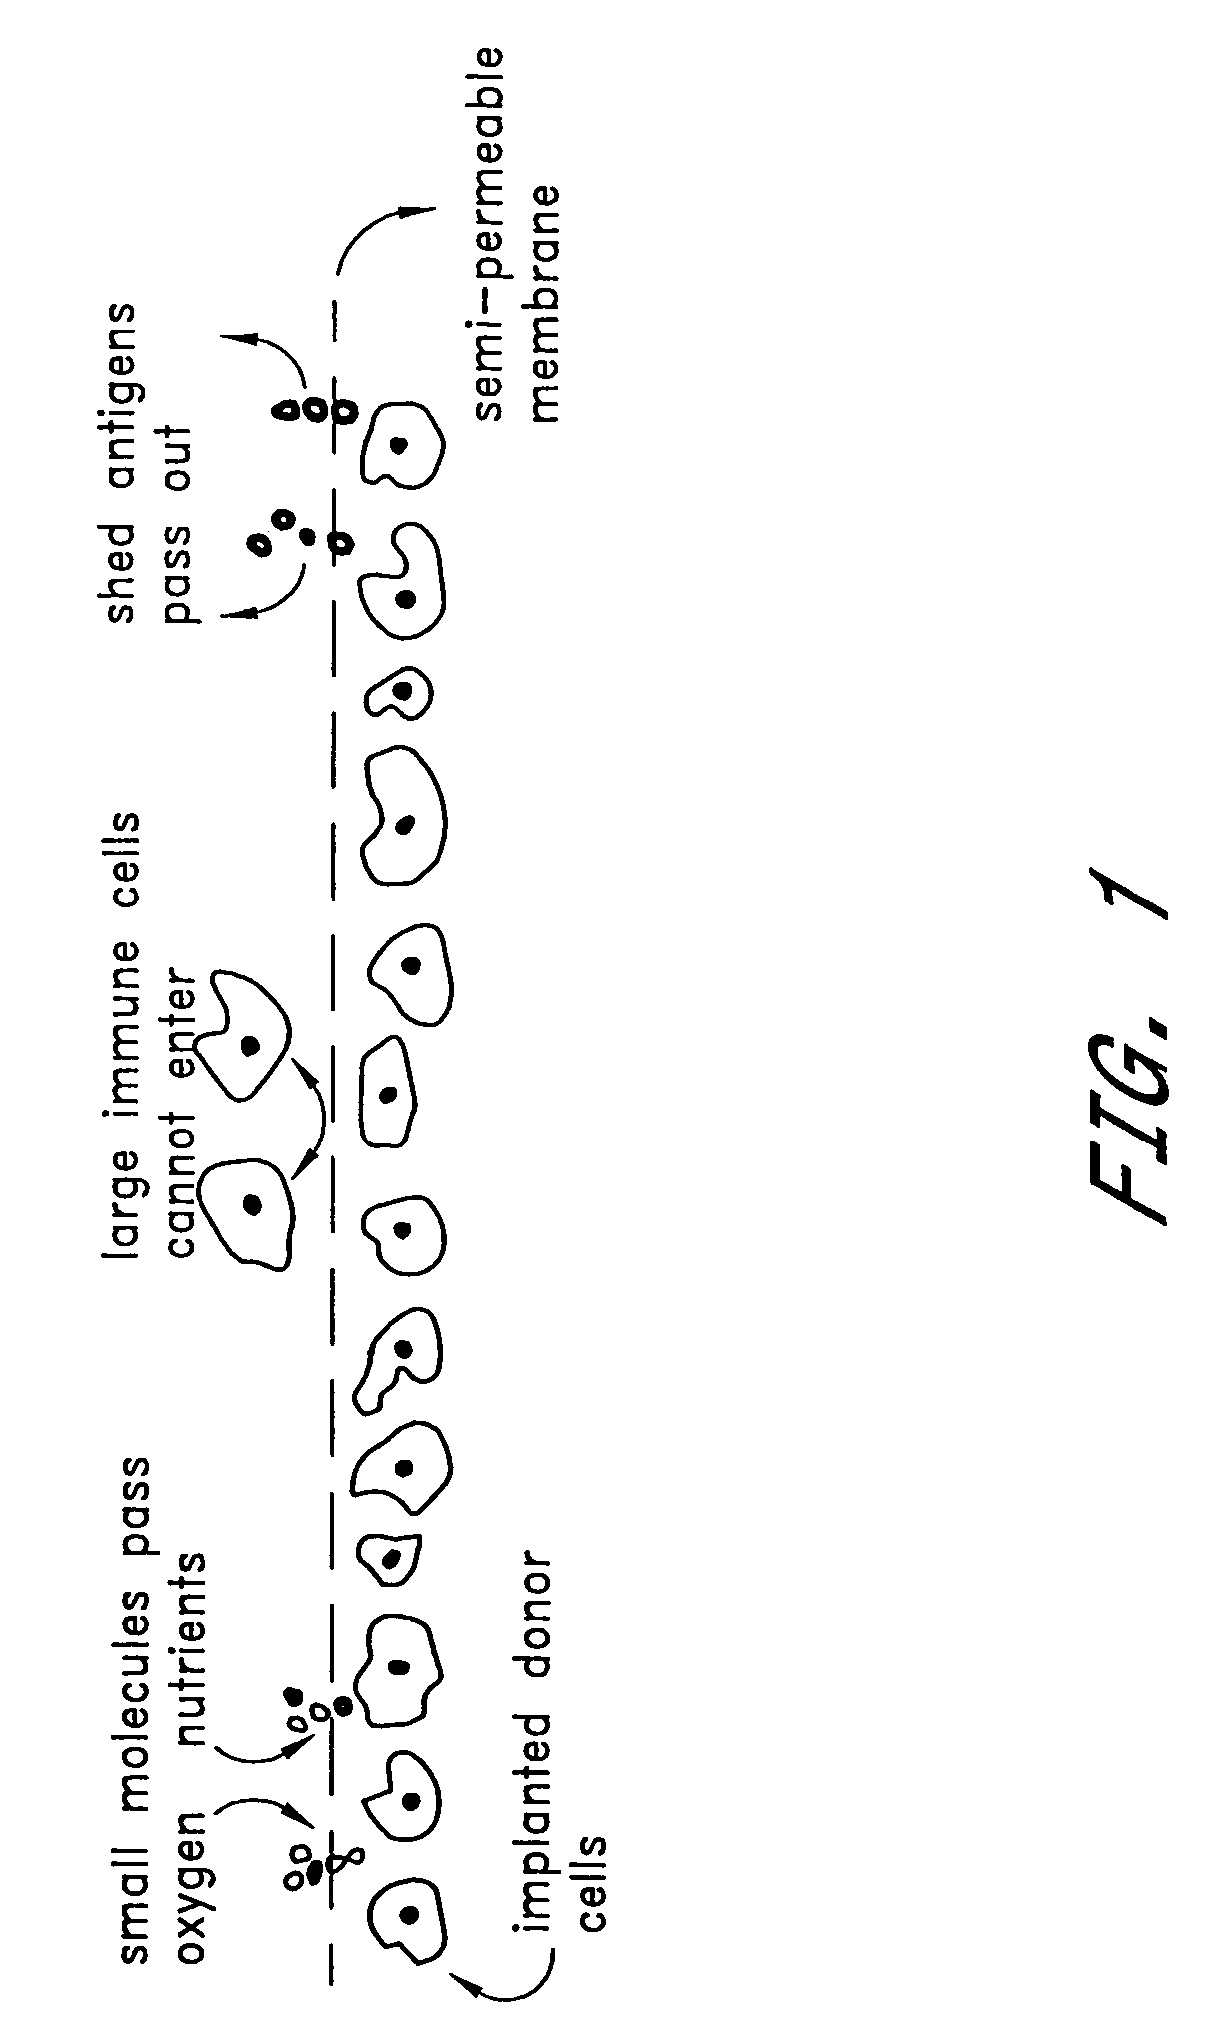 Method of treatment of diabetes through induction of immunological tolerance